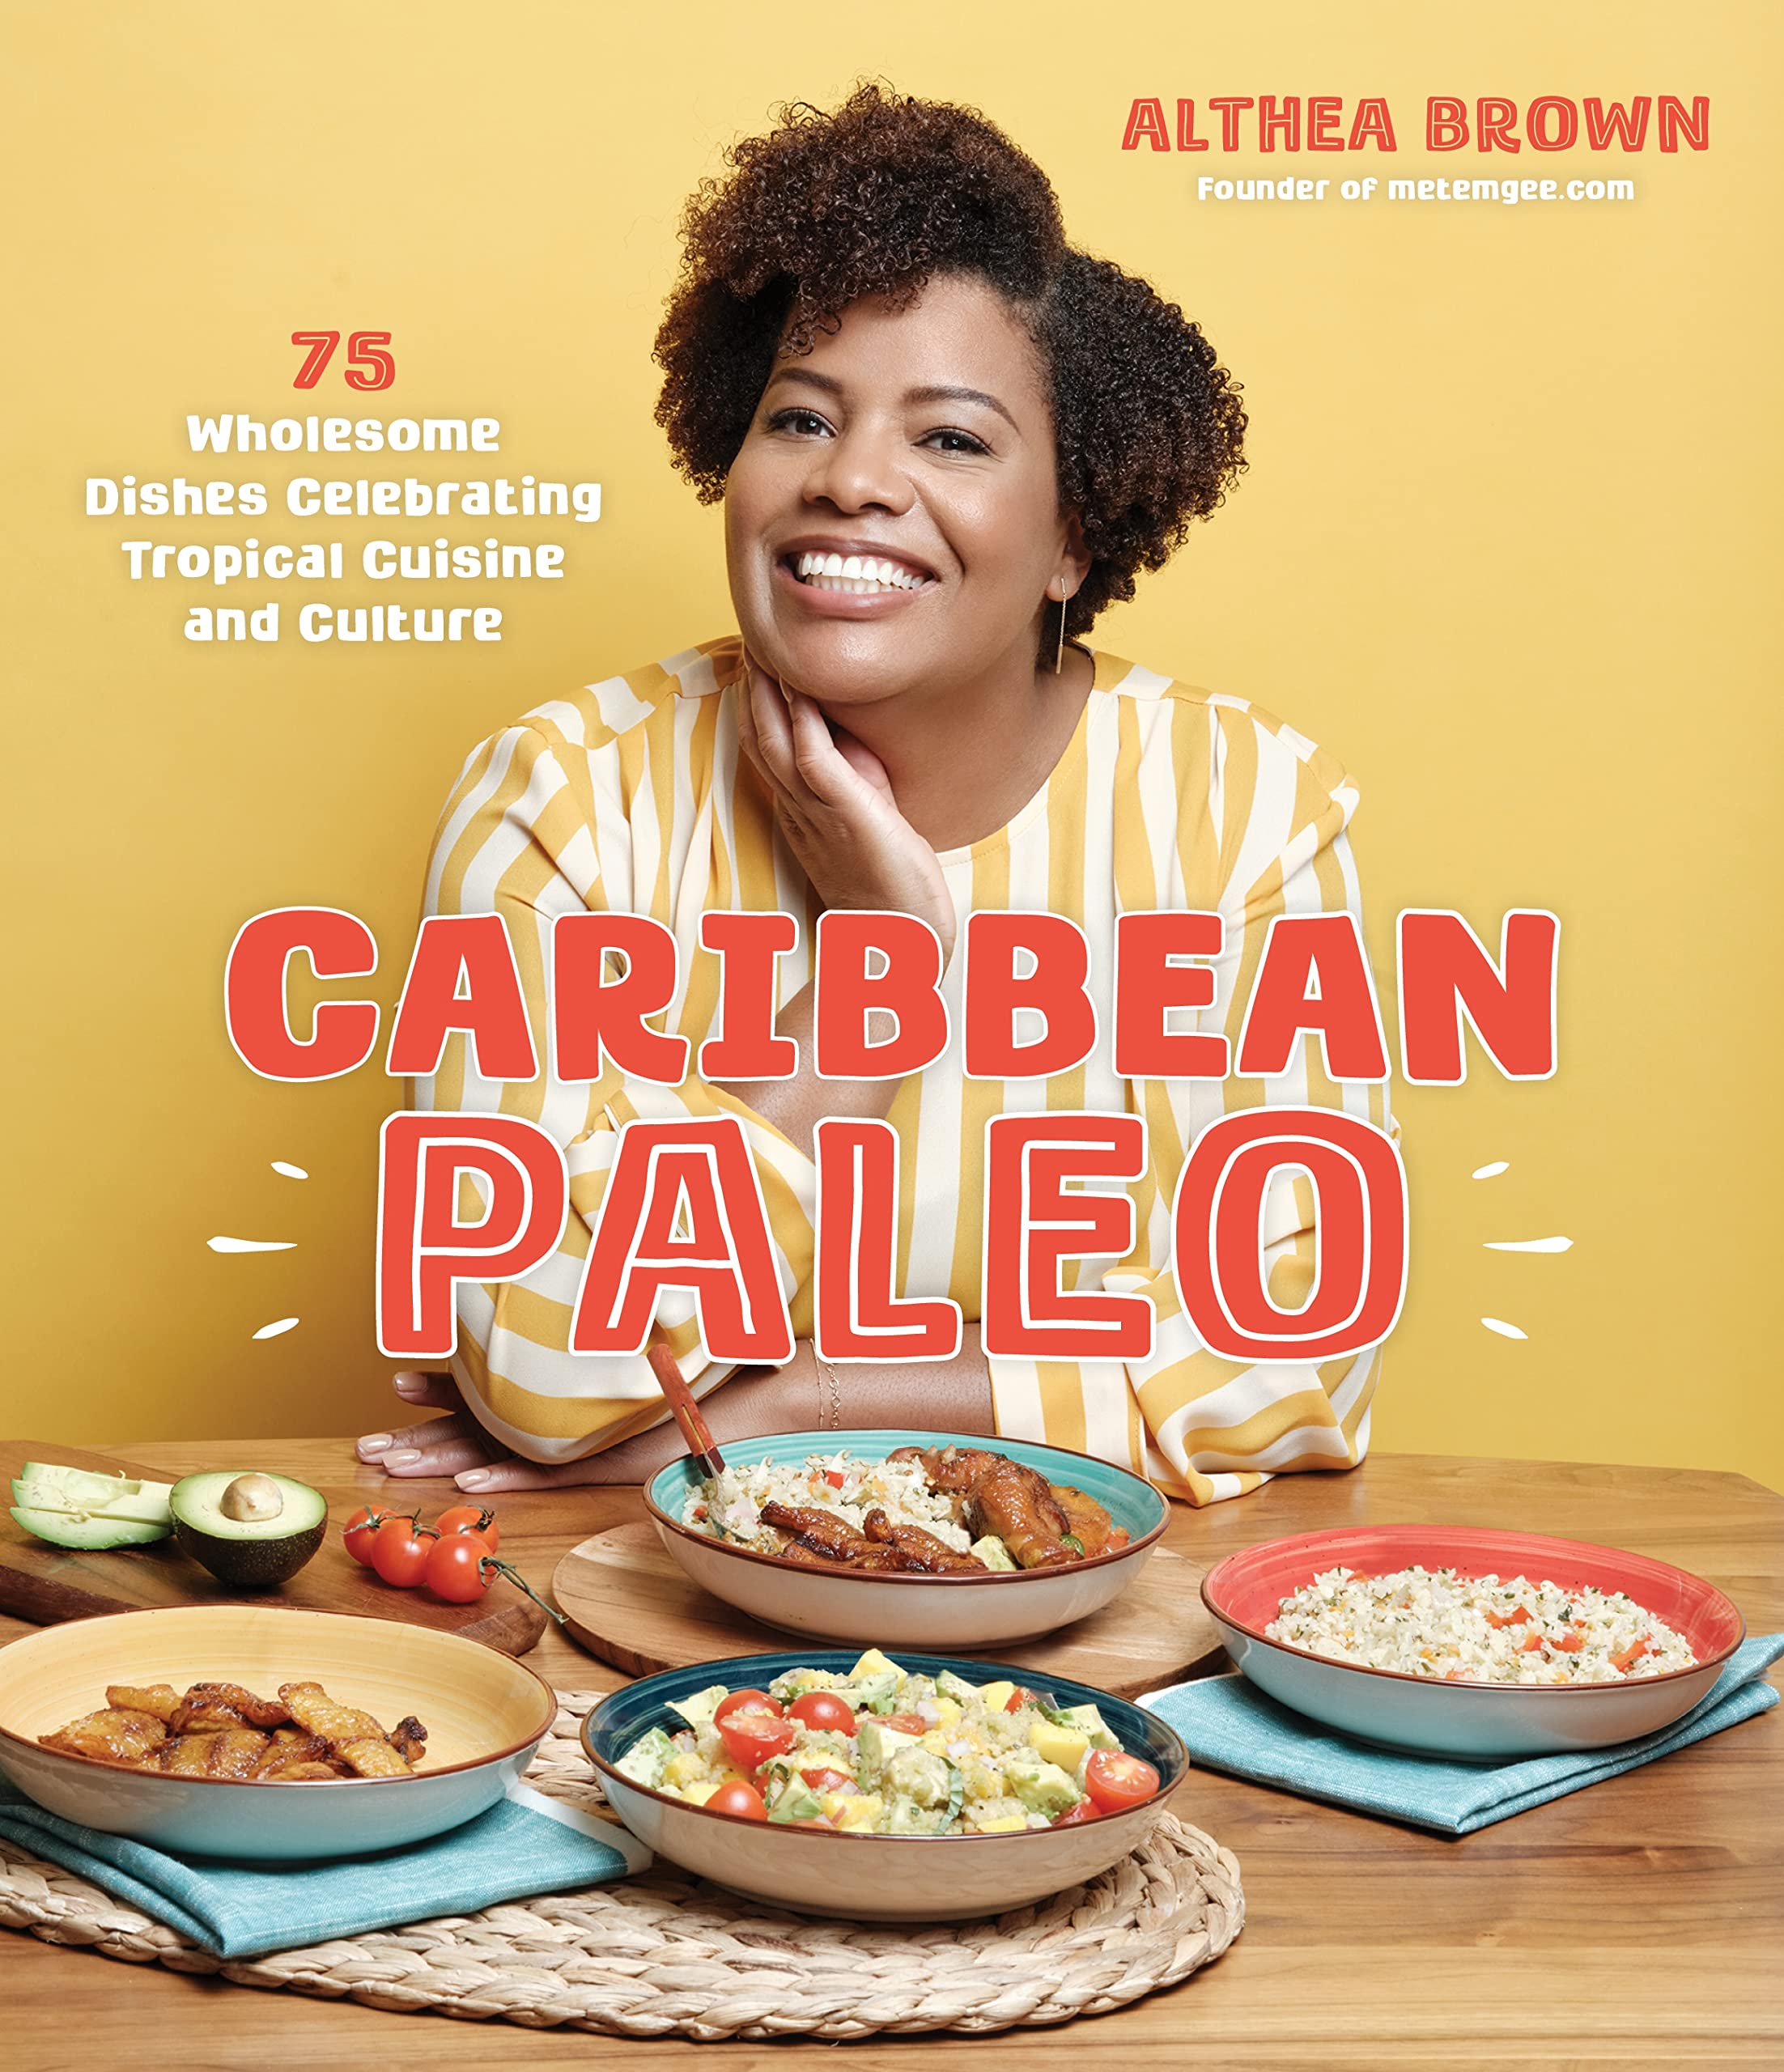 Caribbean Paleo: 75 Wholesome Dishes Celebrating Tropical Cuisine and Culture (Althea Brown) *Signed*